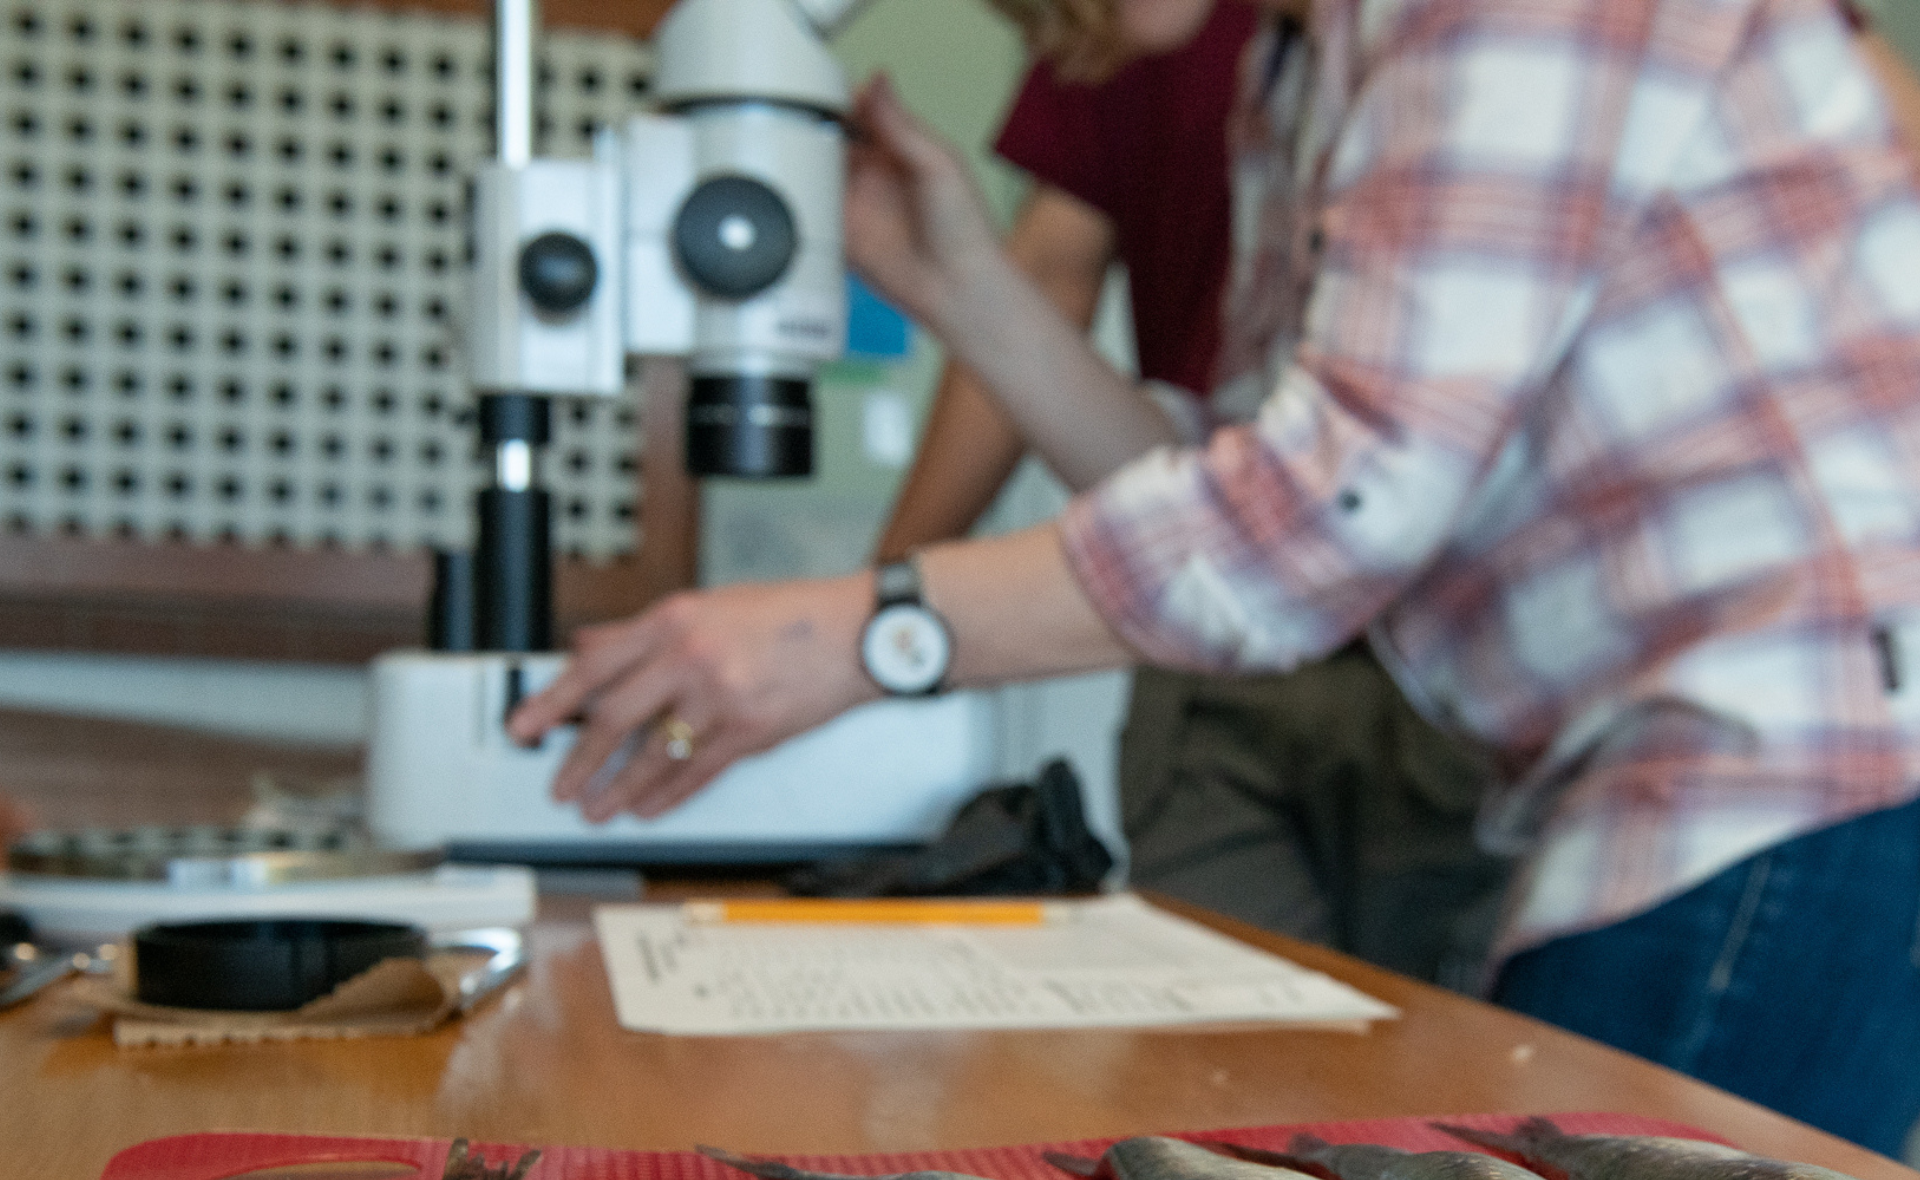 Two people are looking into a microscope. There is a notepad and a pen next to them.